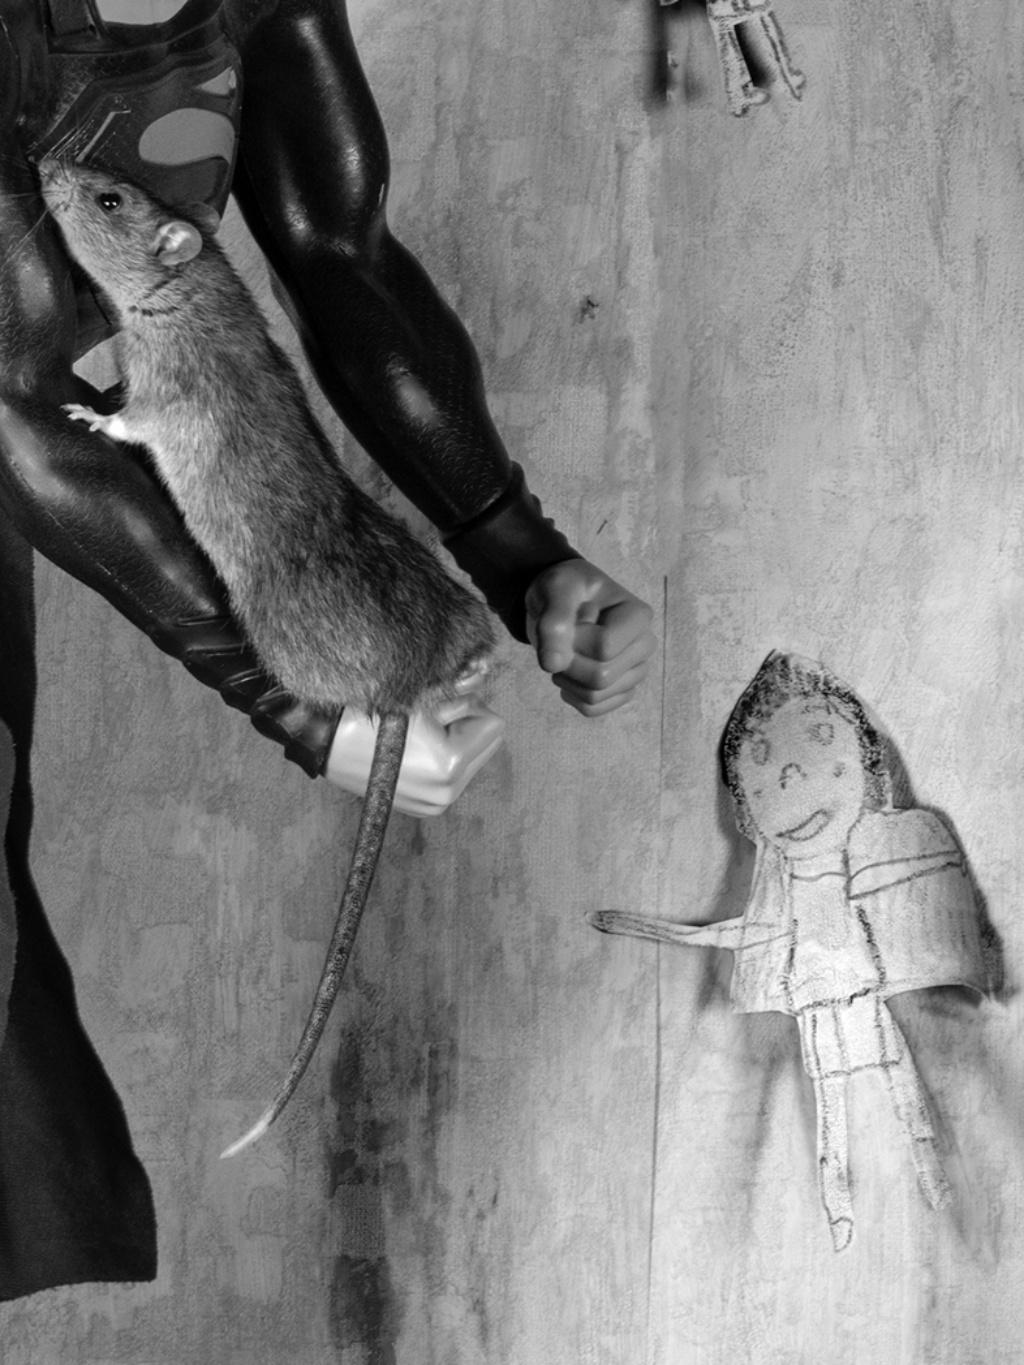 Roger BALLEN (*1950, America/South Africa)
Rat Dream, 2018
Archival pigment print
61 x 43 cm (24 x 16 7/8 in.)
Edition of 9, plus 2 AP; Ed. no. 2/9
Print only

– Roger the Rat

Surreal, refined, disturbing: Roger Ballen has made a name for himself